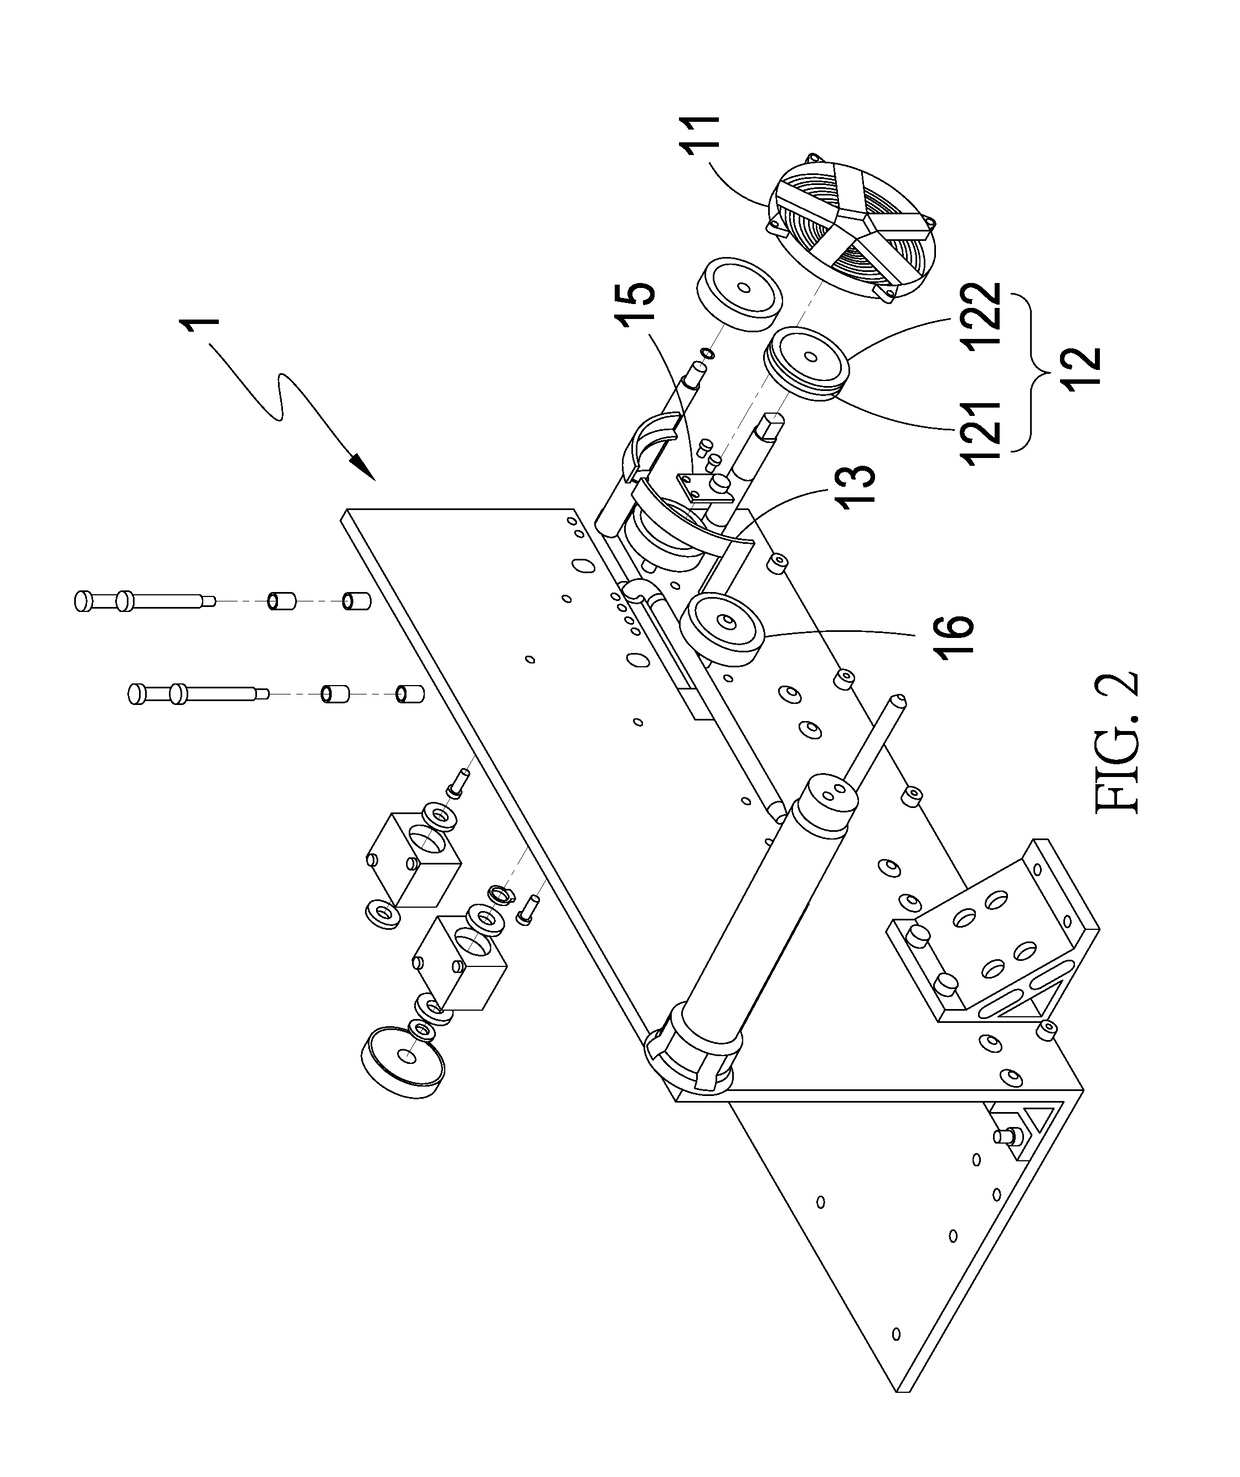 Heat-seal apparatus and method thereof